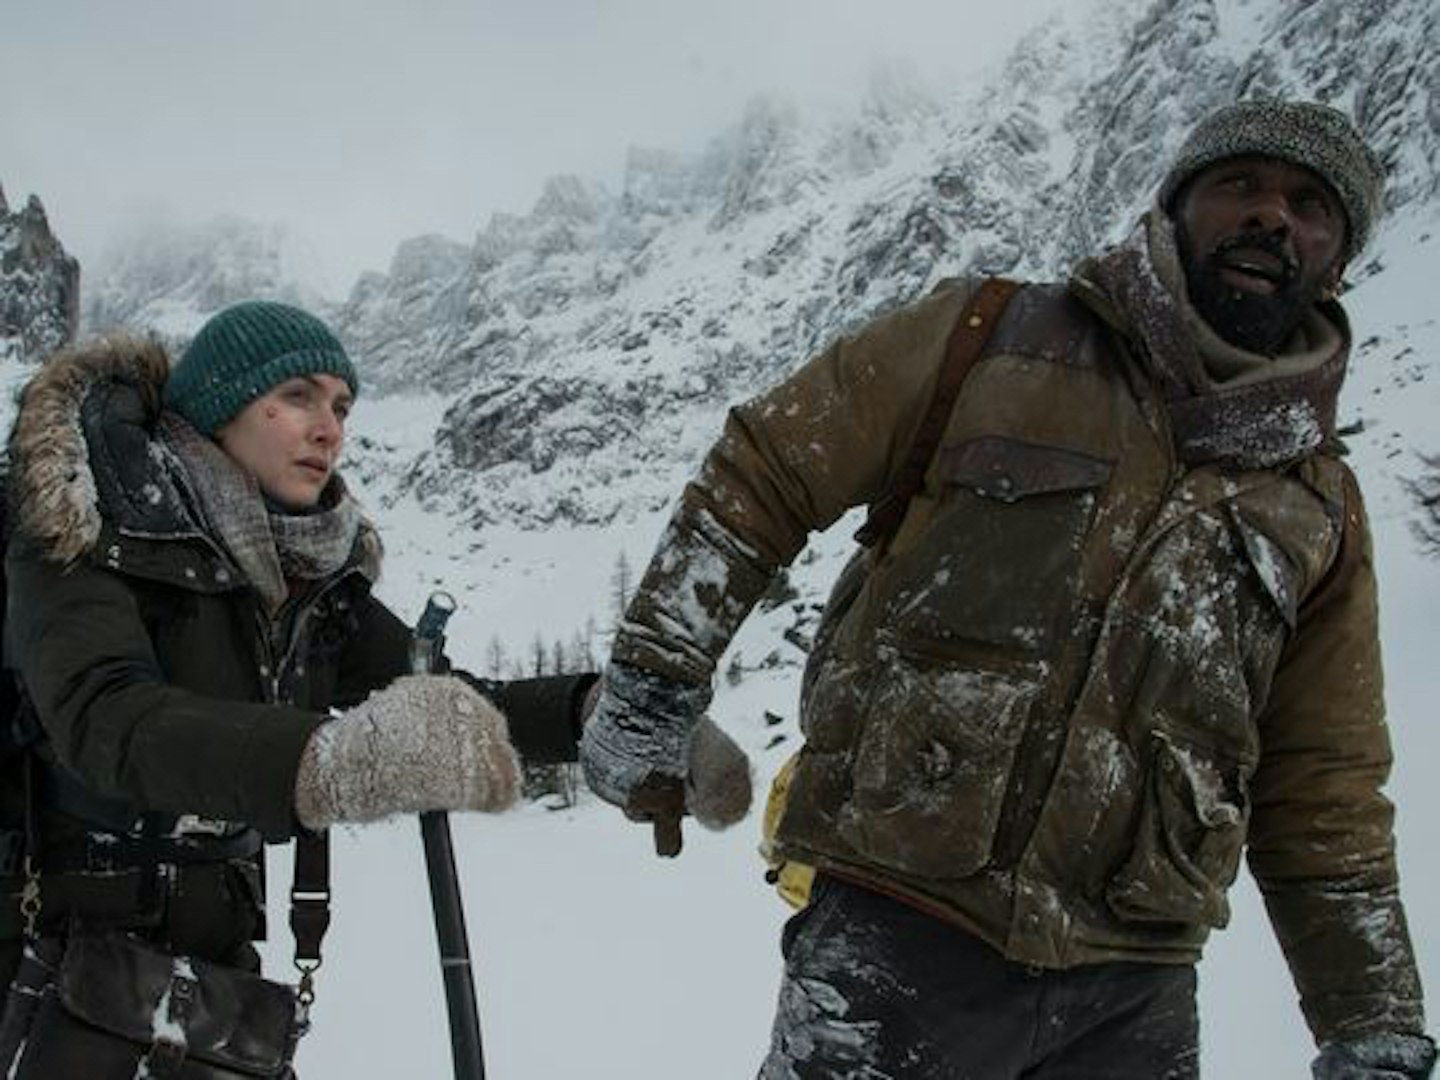 Kate Winslet and Idris Elba in The Mountain Between Us